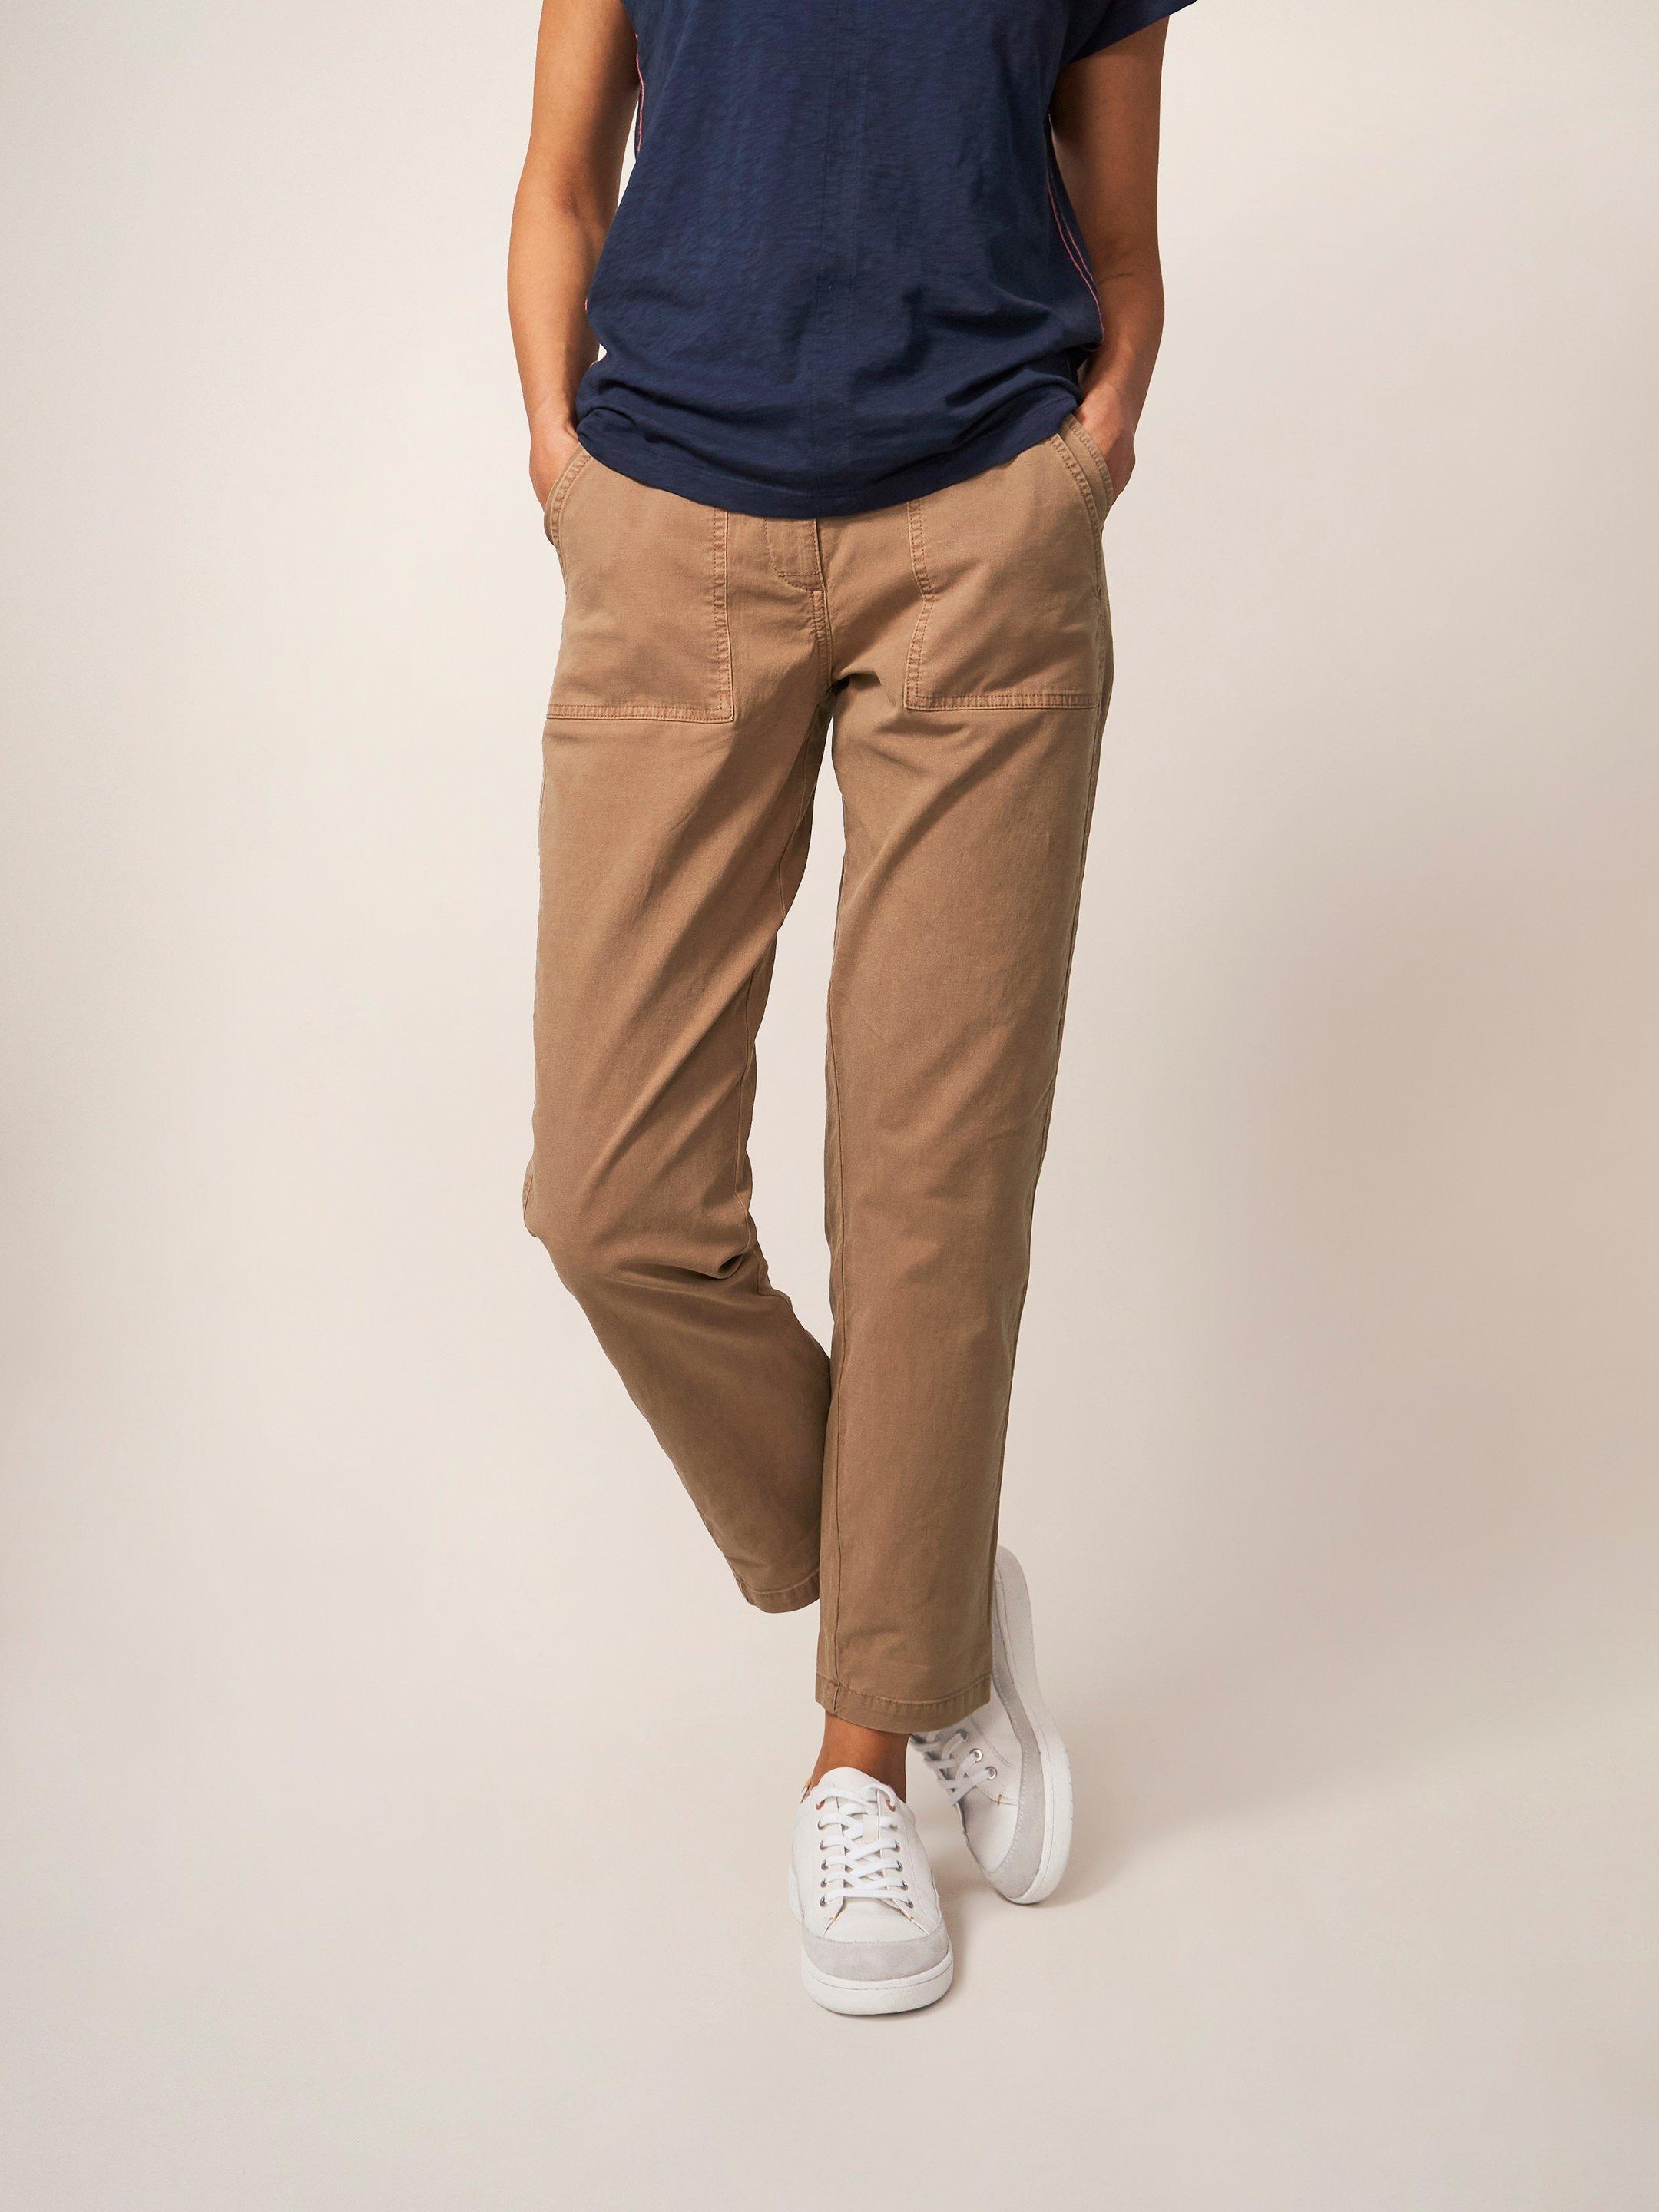 Twister Chino Trousers in LGT NAT - MODEL FRONT